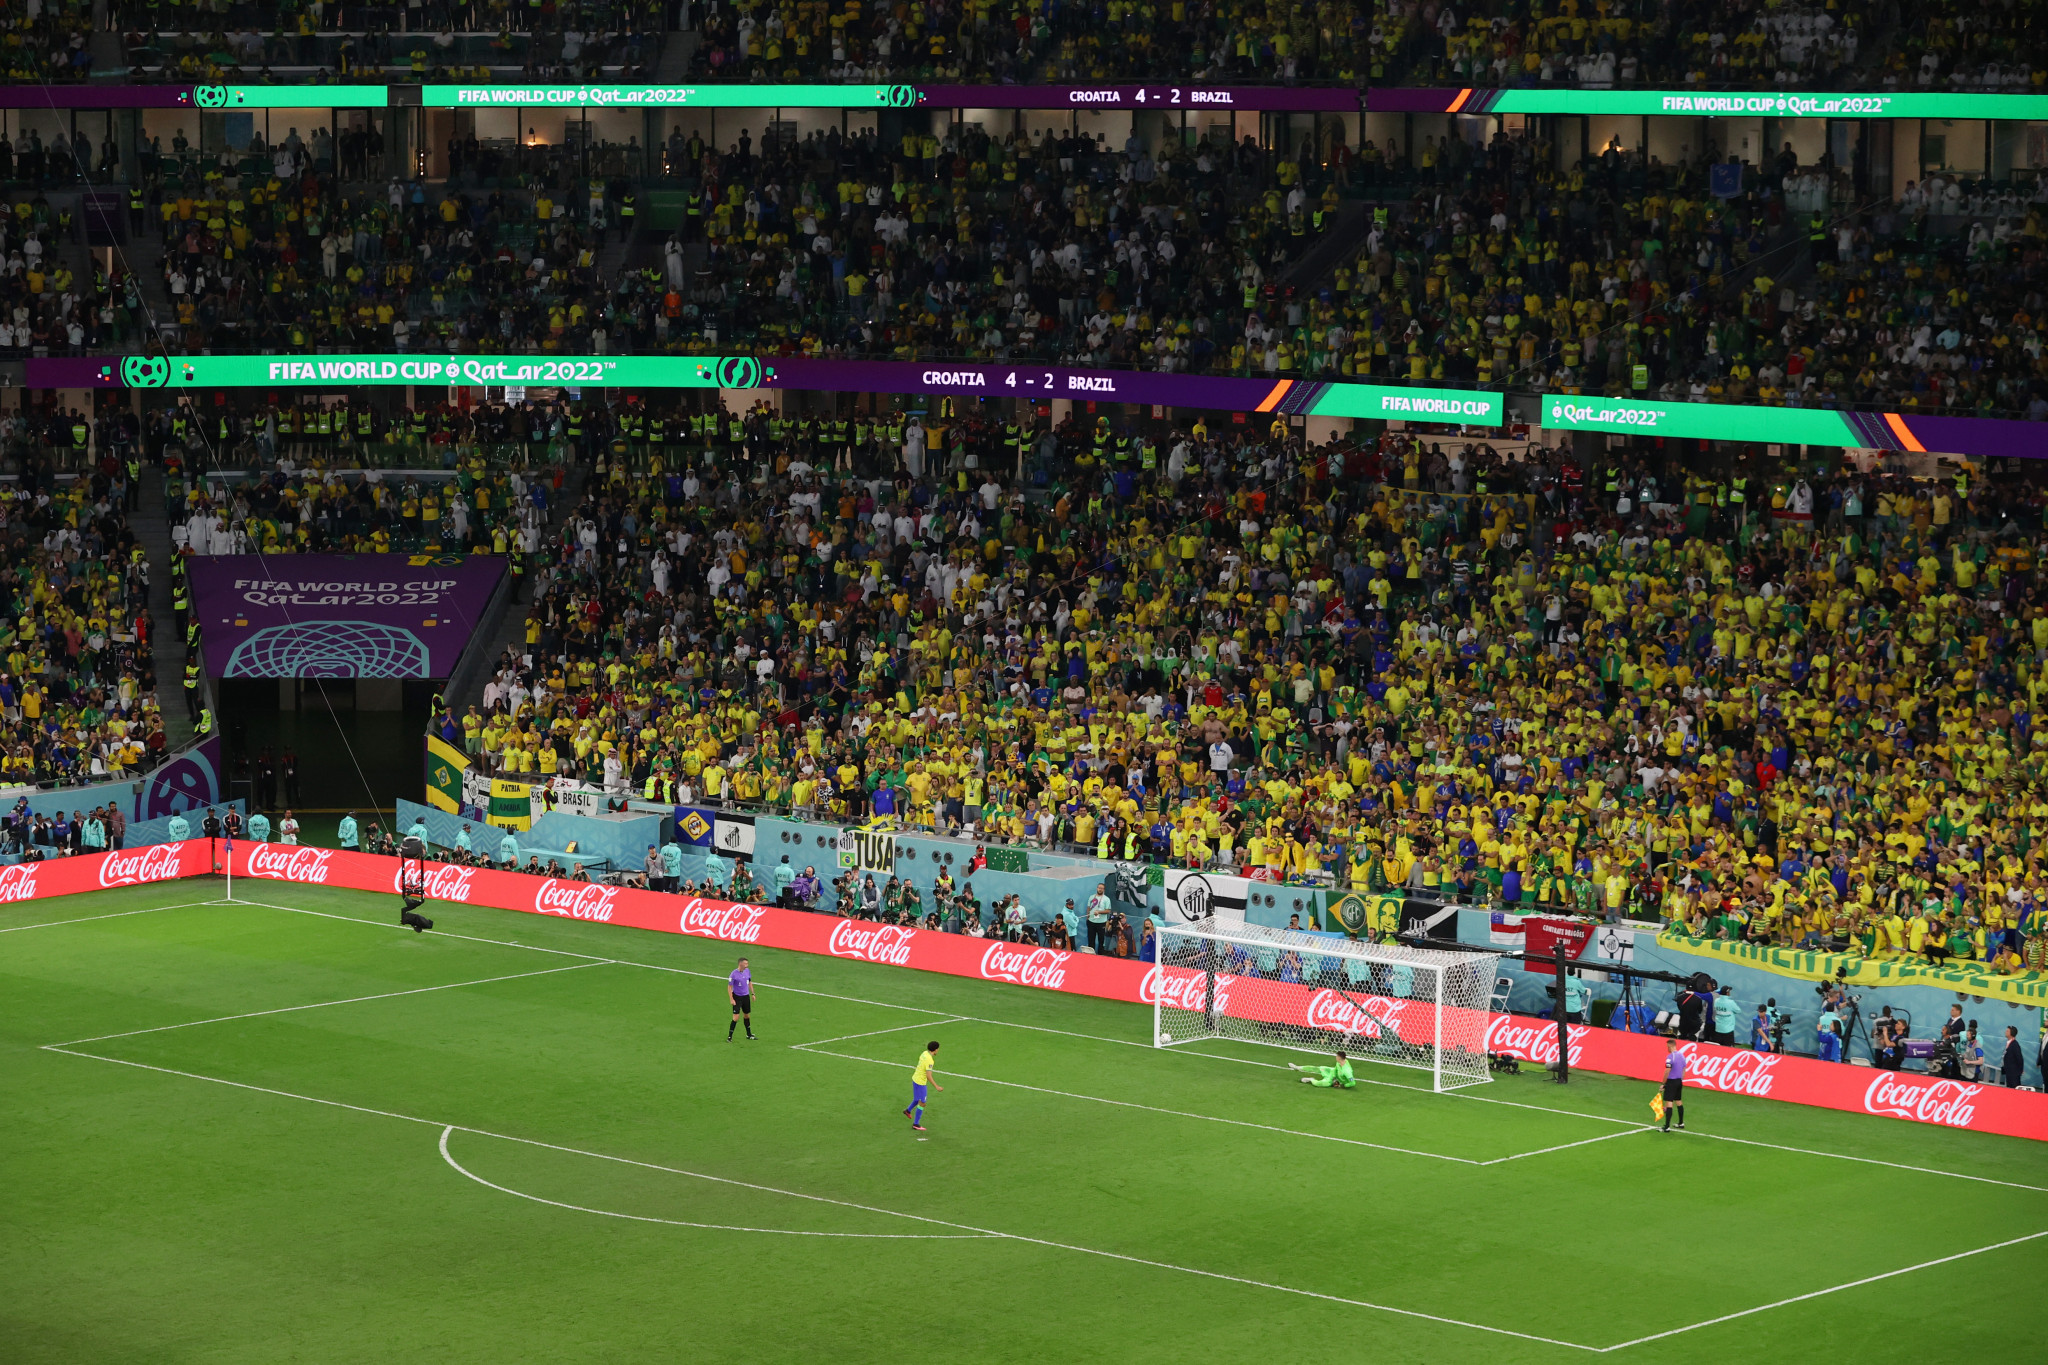 Agony and ecstasy as penalty shoot-outs decide opening FIFA World Cup quarter-finals